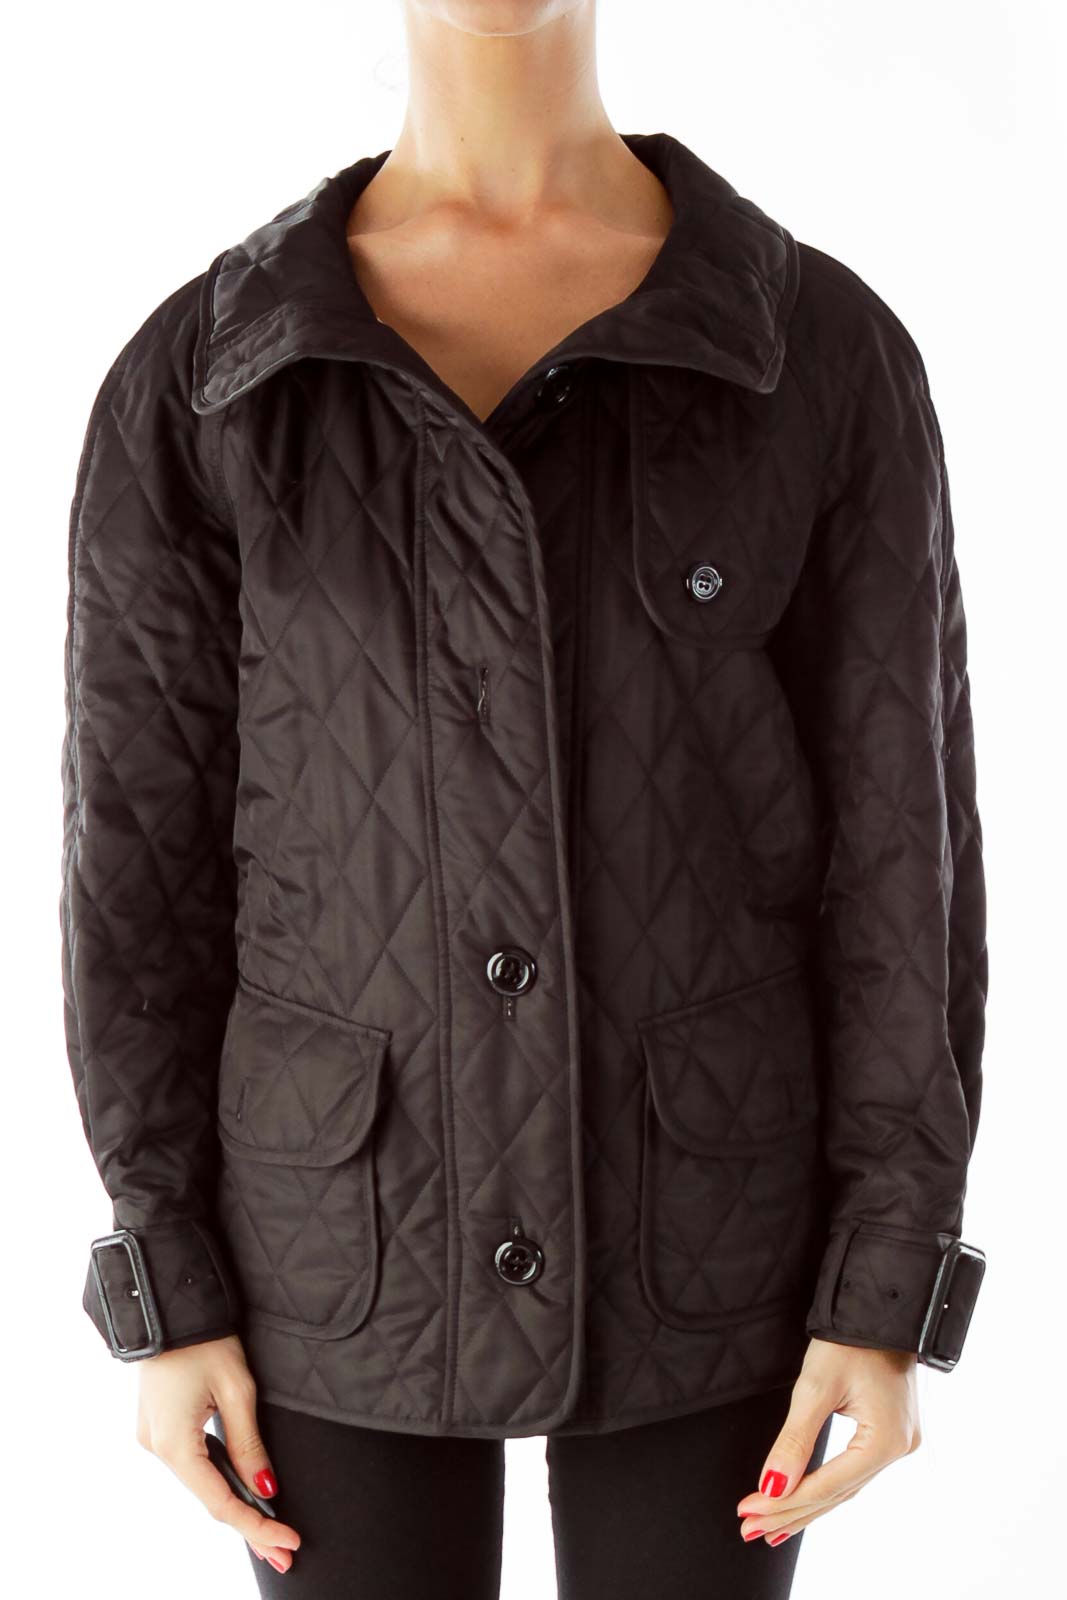 Black Burberry Cool Weather Jacket Front